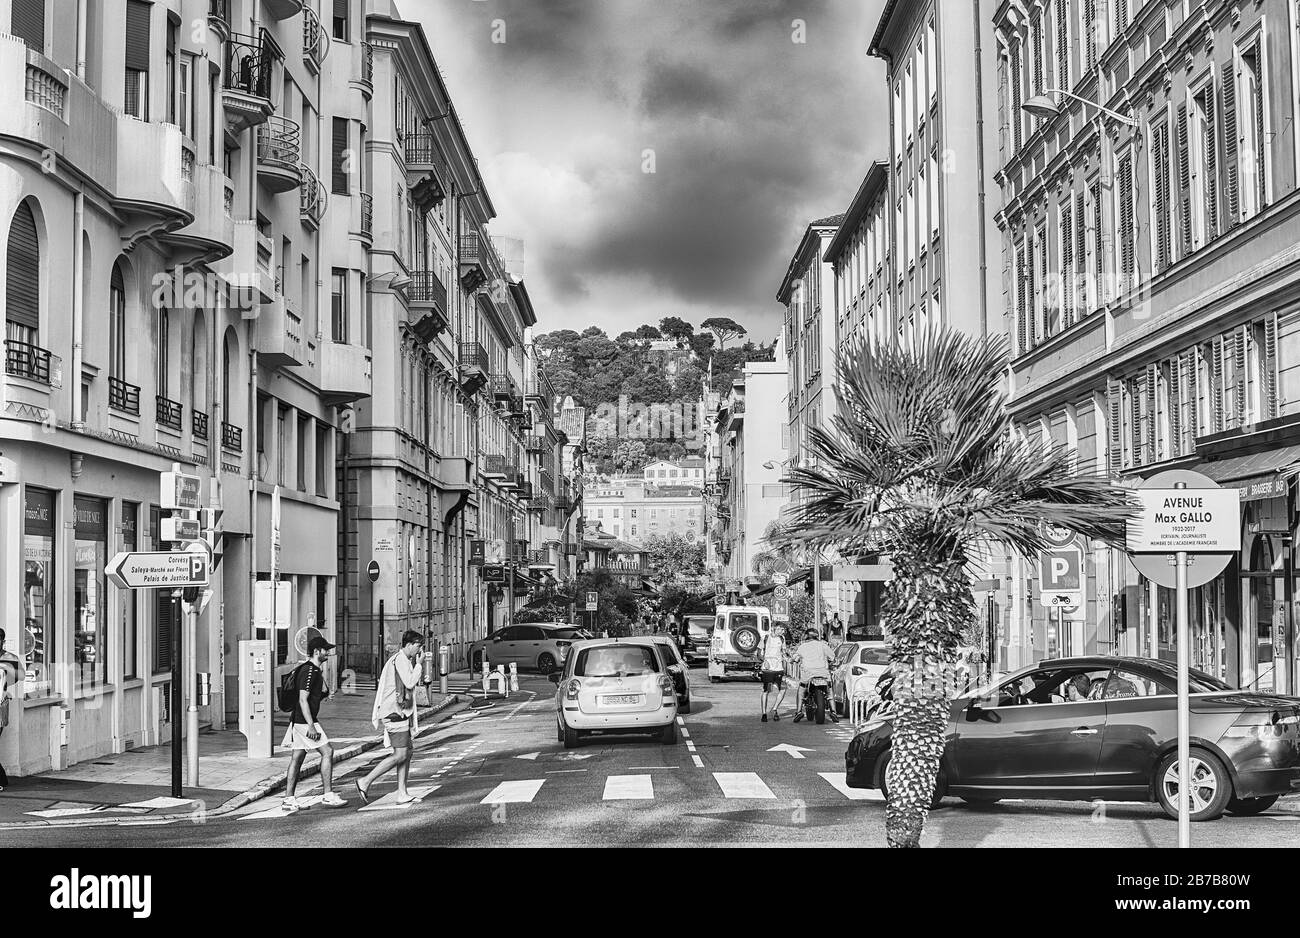 NICE, FRANCE - AUGUST 11: View over Rue Saint-Francois de Paule and the Chateau Hill in central Nice, Cote d'Azur, France, on August 11, 2019 Stock Photo